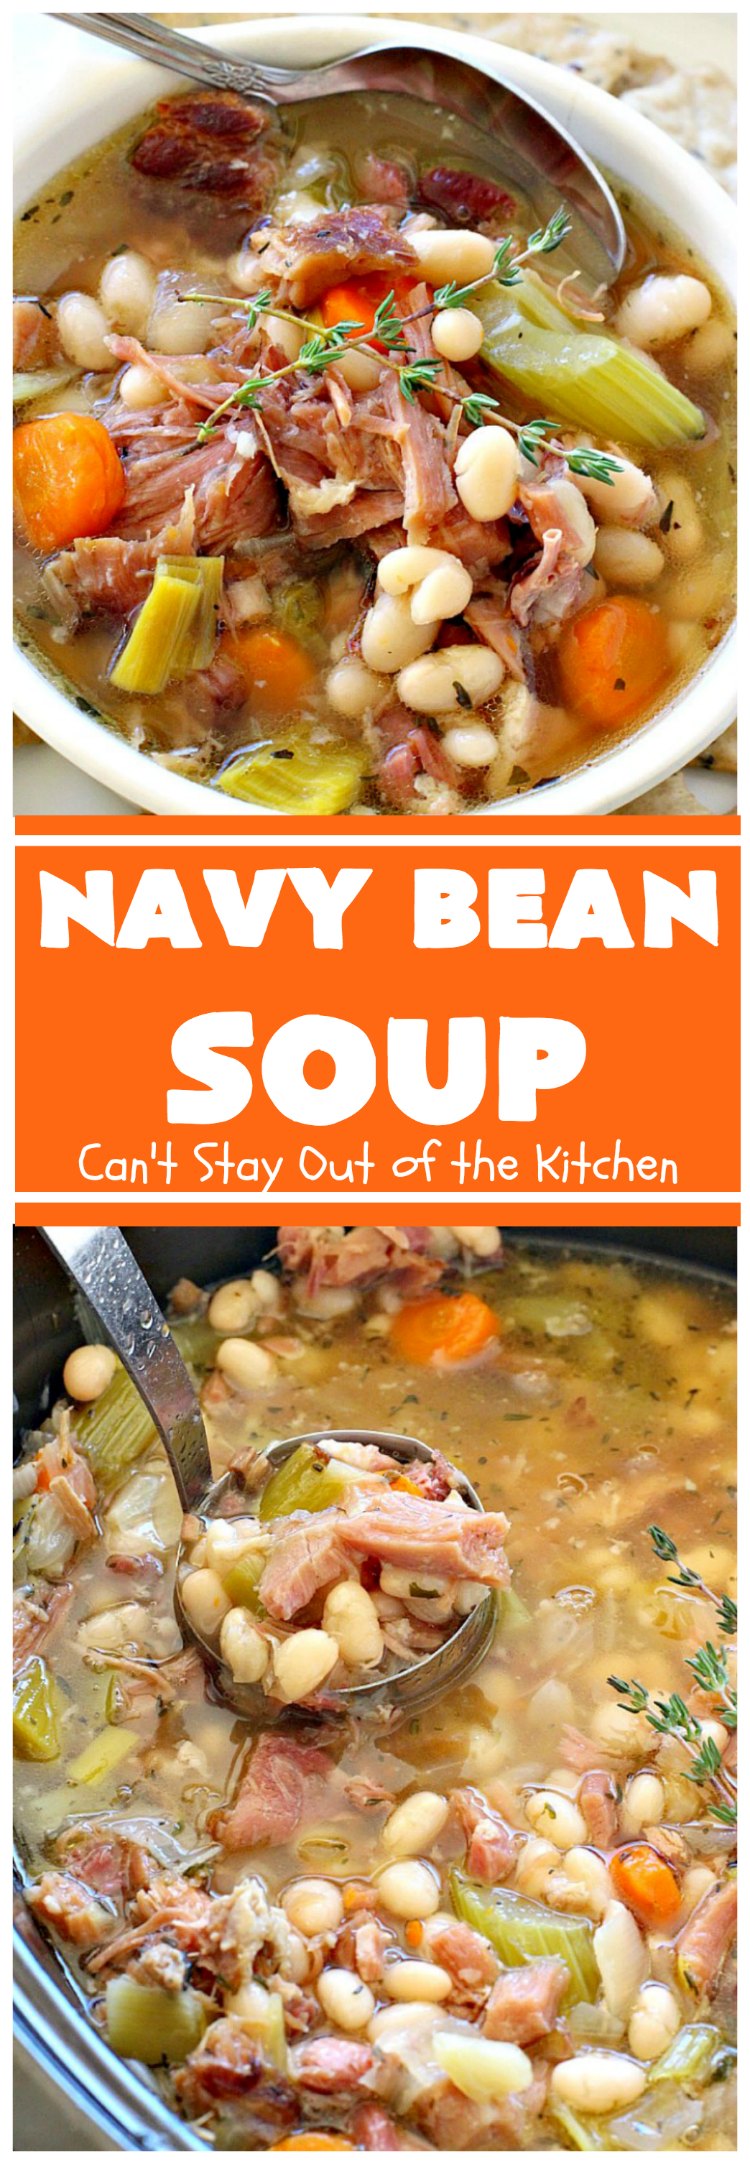 Navy Bean Soup | Can't Stay Out of the Kitchen